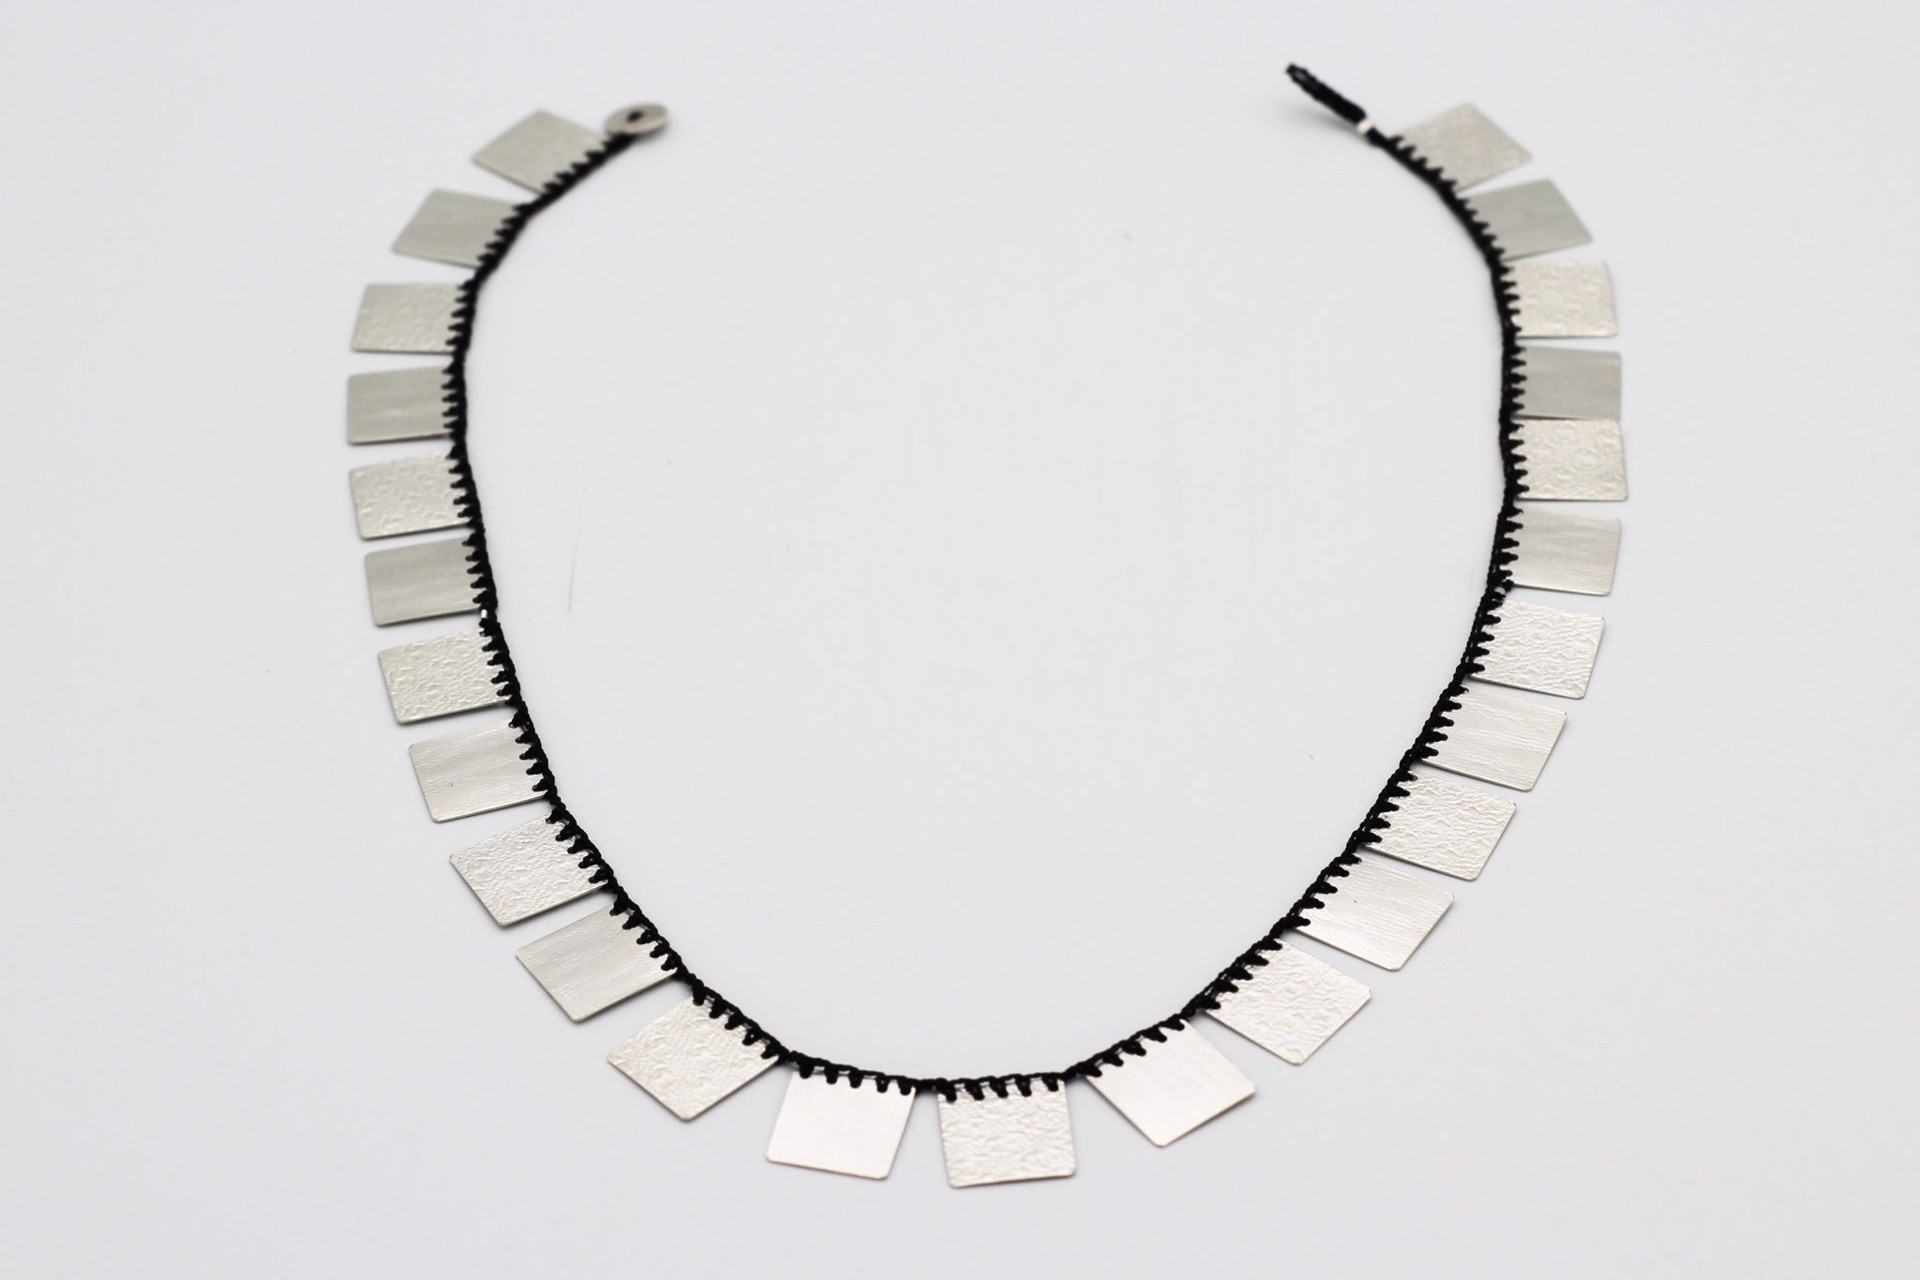 Necklace with Black Silk by Erica Schlueter